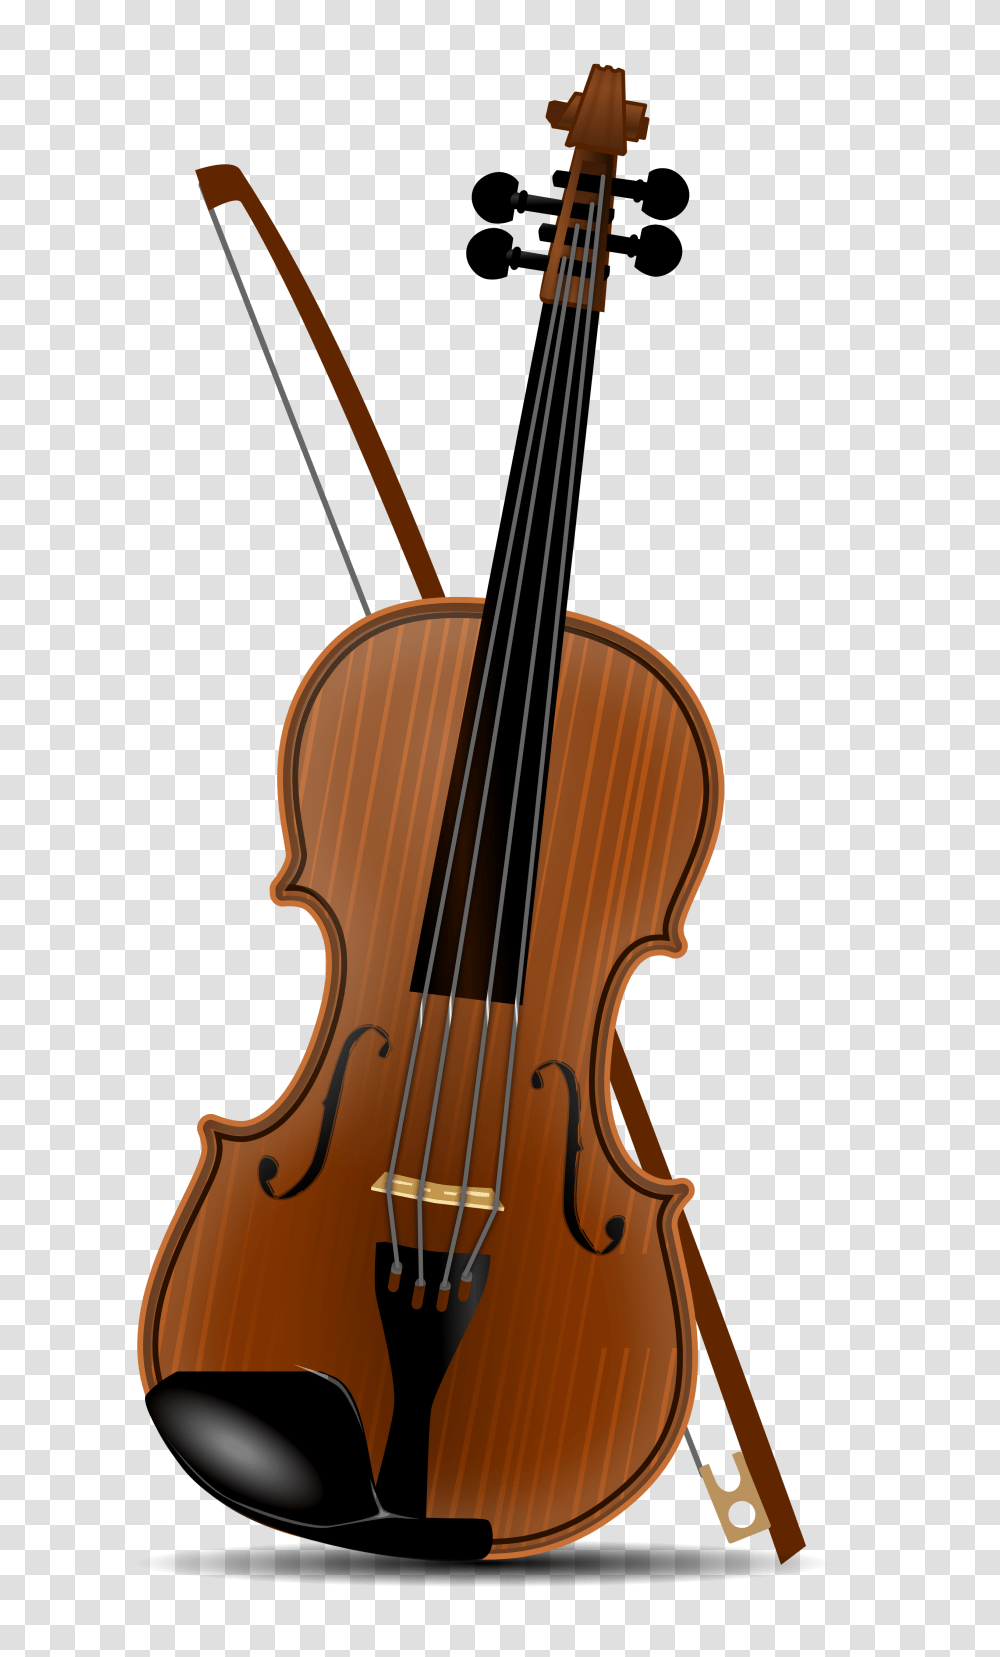 Violin Clip Art My Crafts Violin Music, Leisure Activities, Musical Instrument, Fiddle, Viola Transparent Png